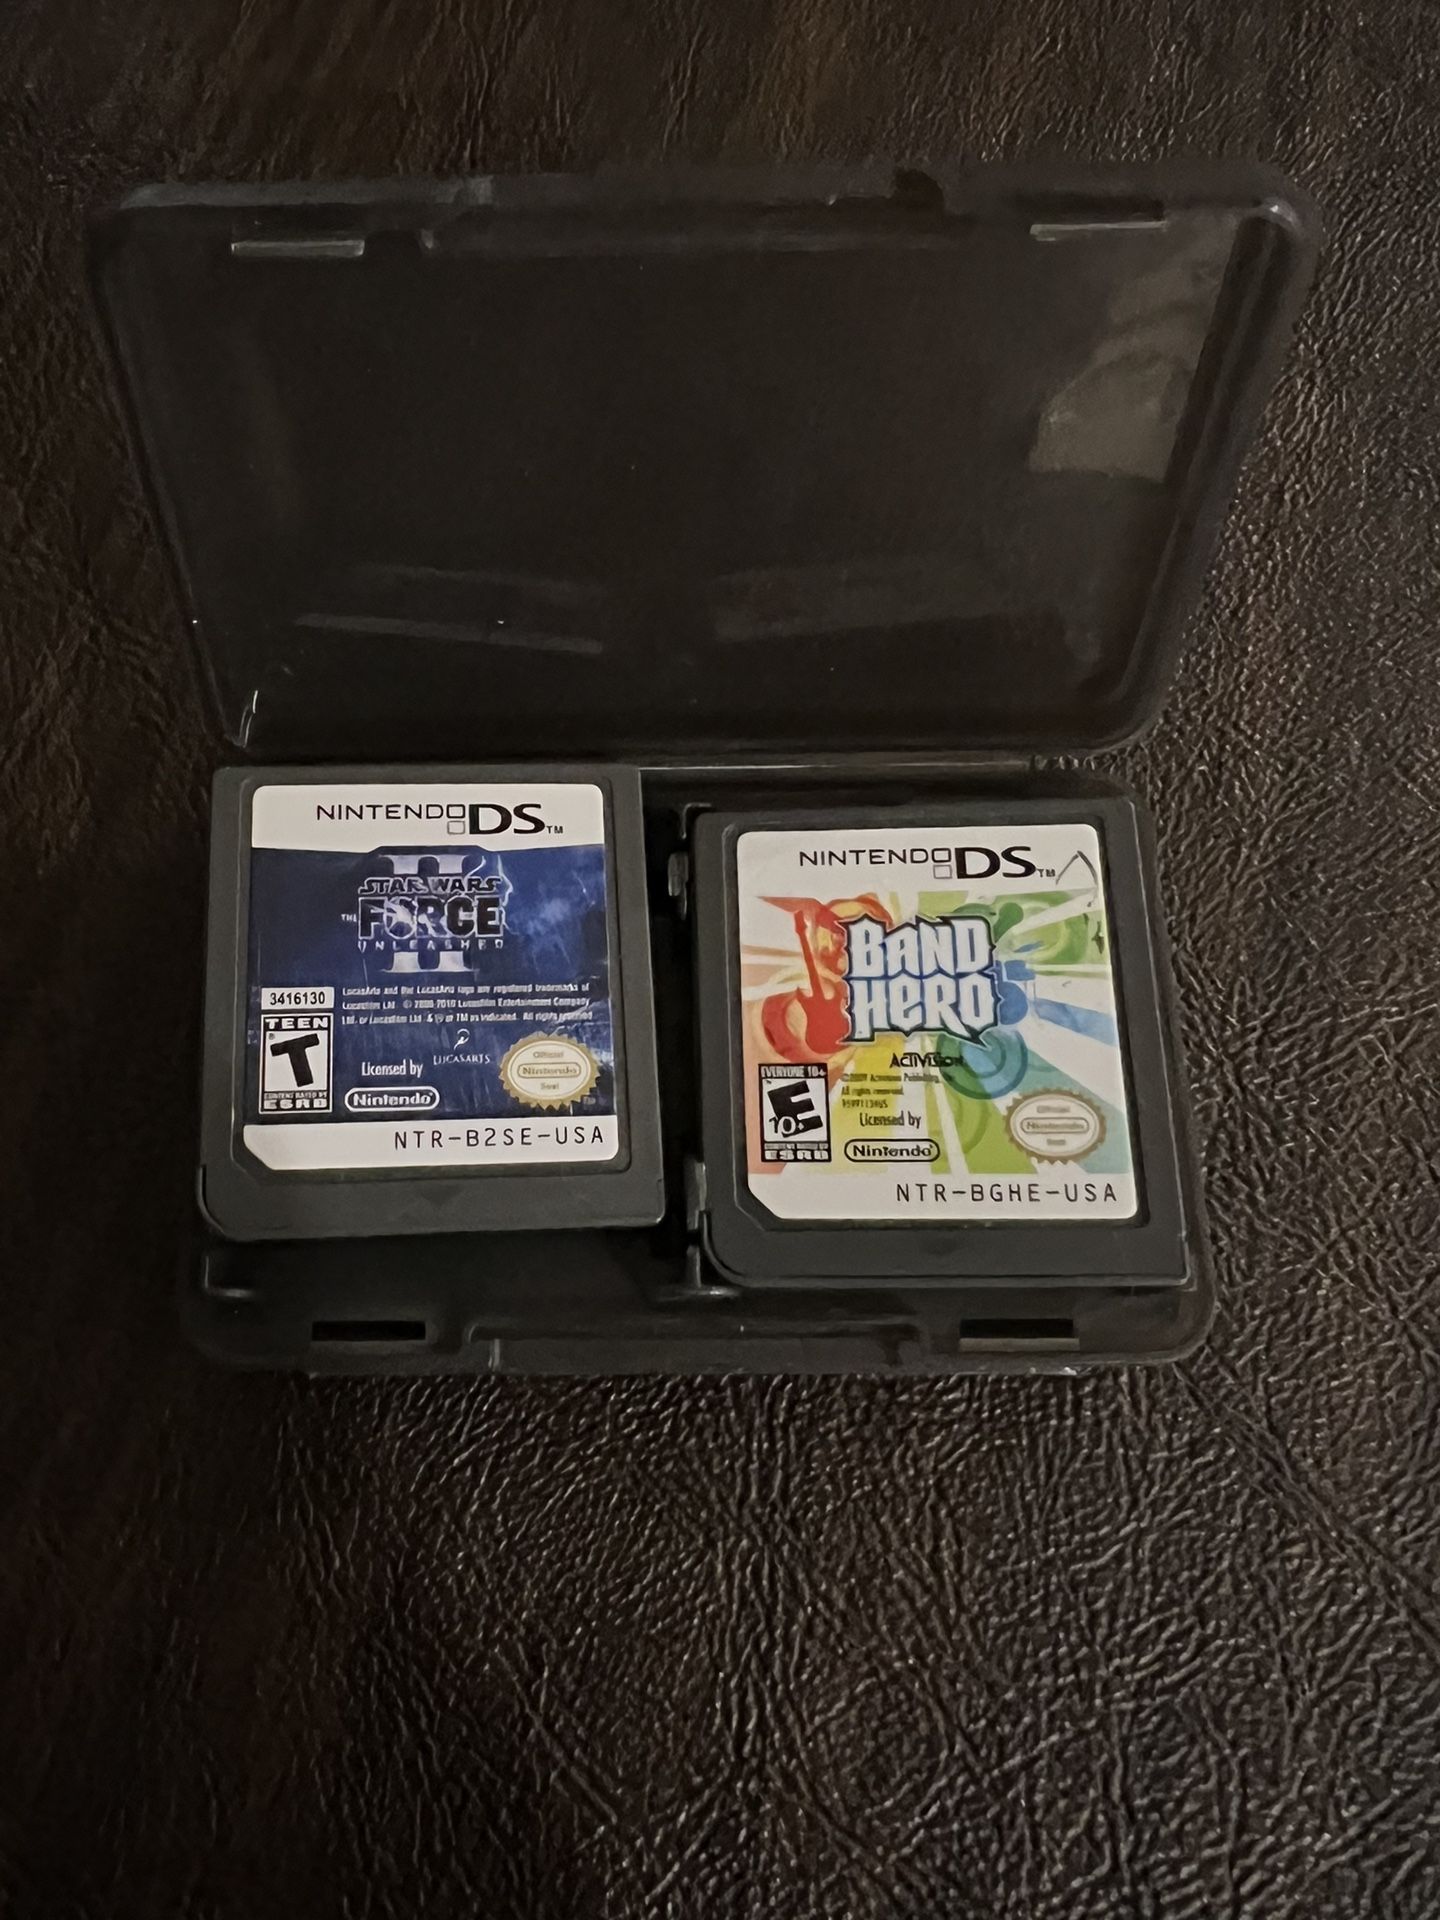 Nintendo DS Star Wars Force Unleashed And Band Hero